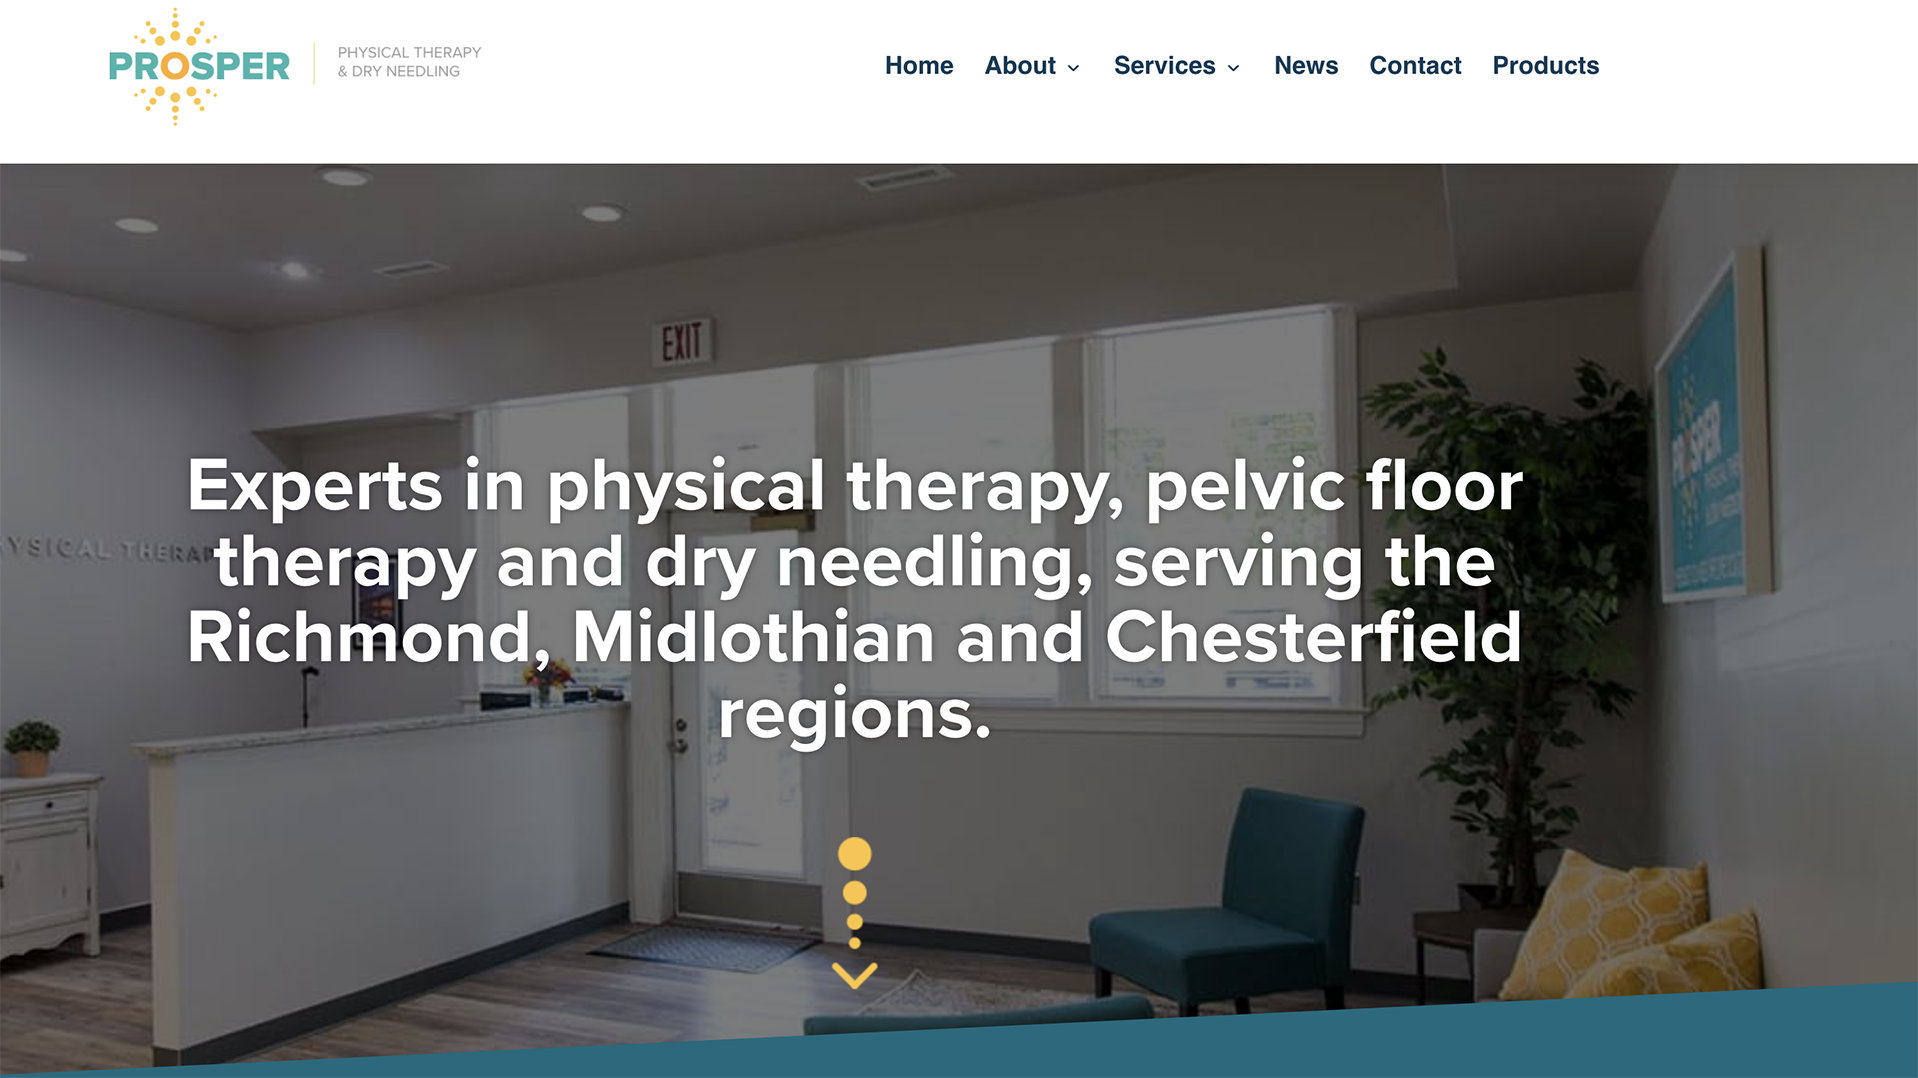 Prosper Physical Therapy website